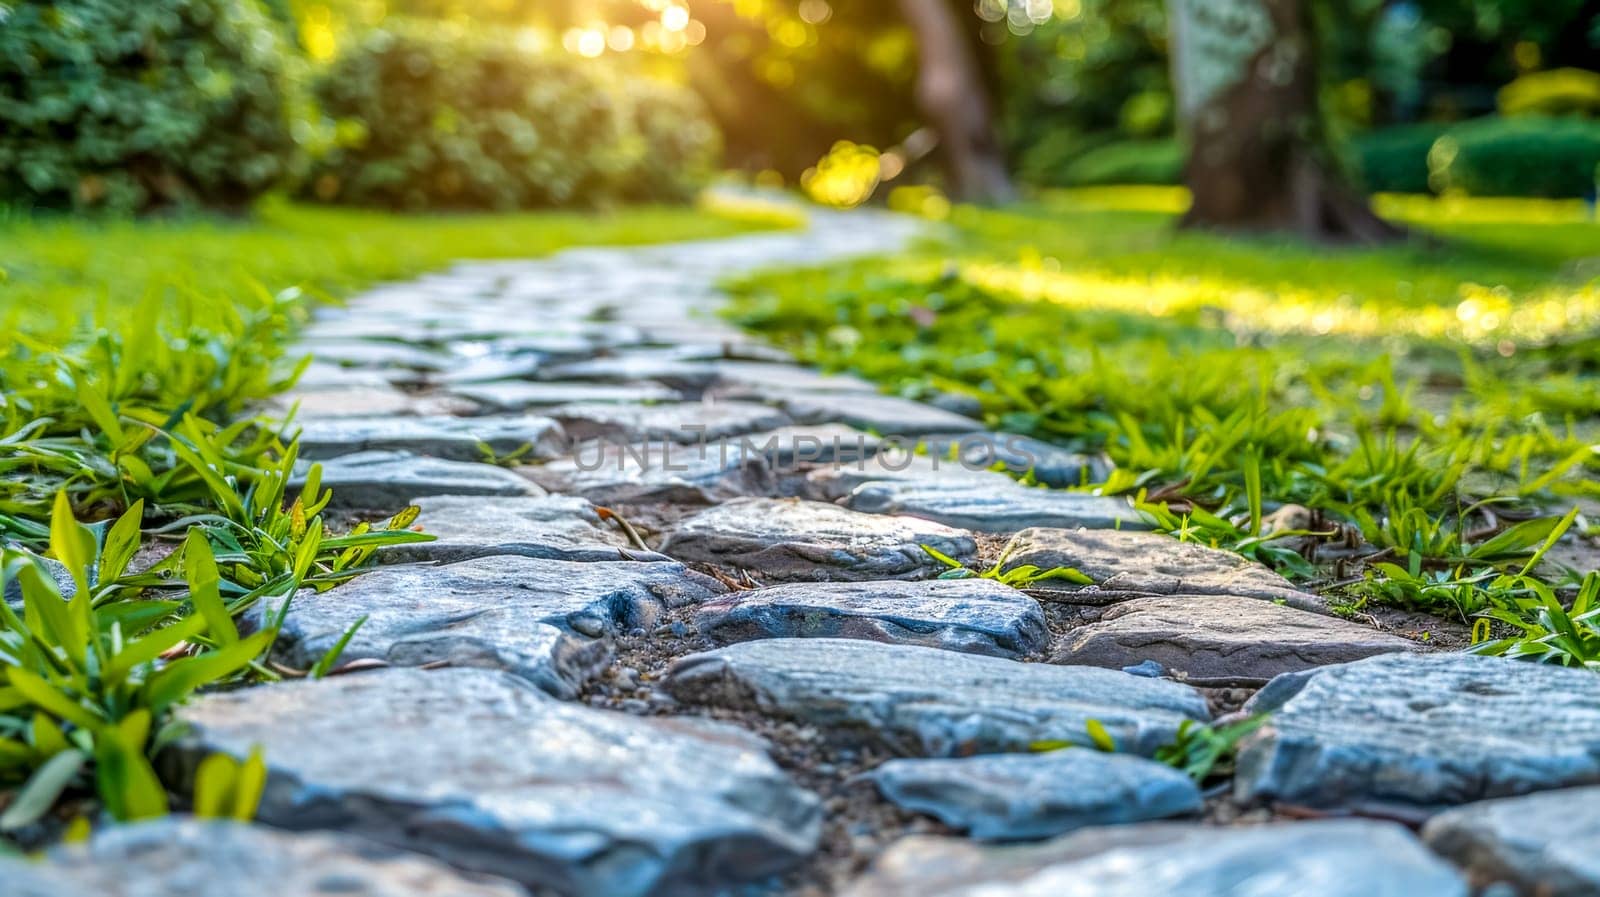 Low-angle view of a stone pathway with vibrant greenery in a peaceful garden during golden hour